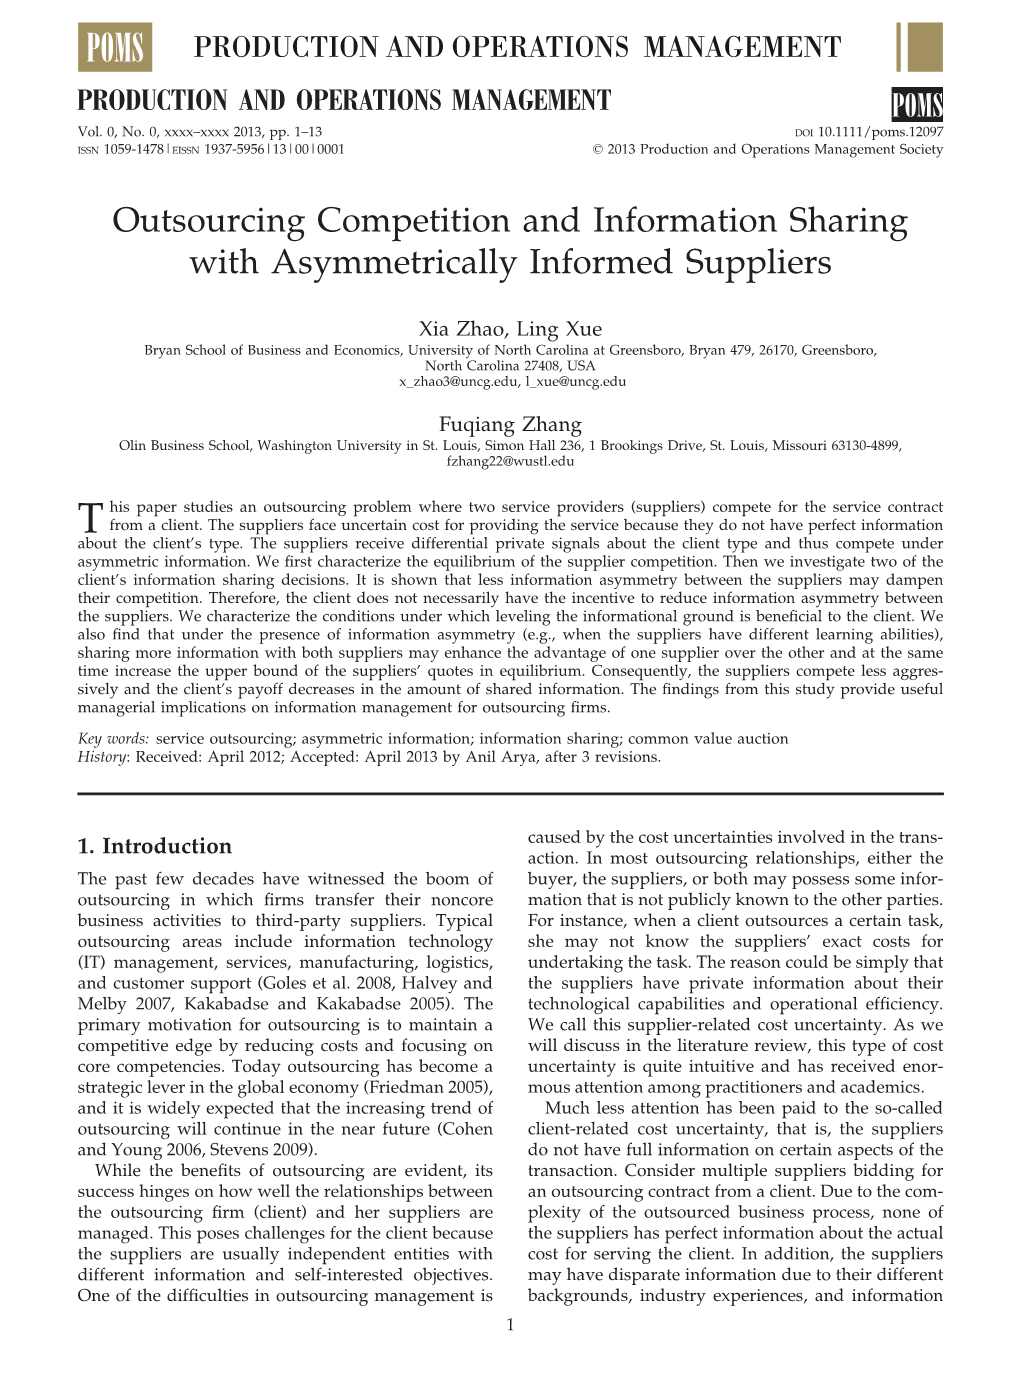 Outsourcing Competition and Information Sharing with Asymmetrically Informed Suppliers